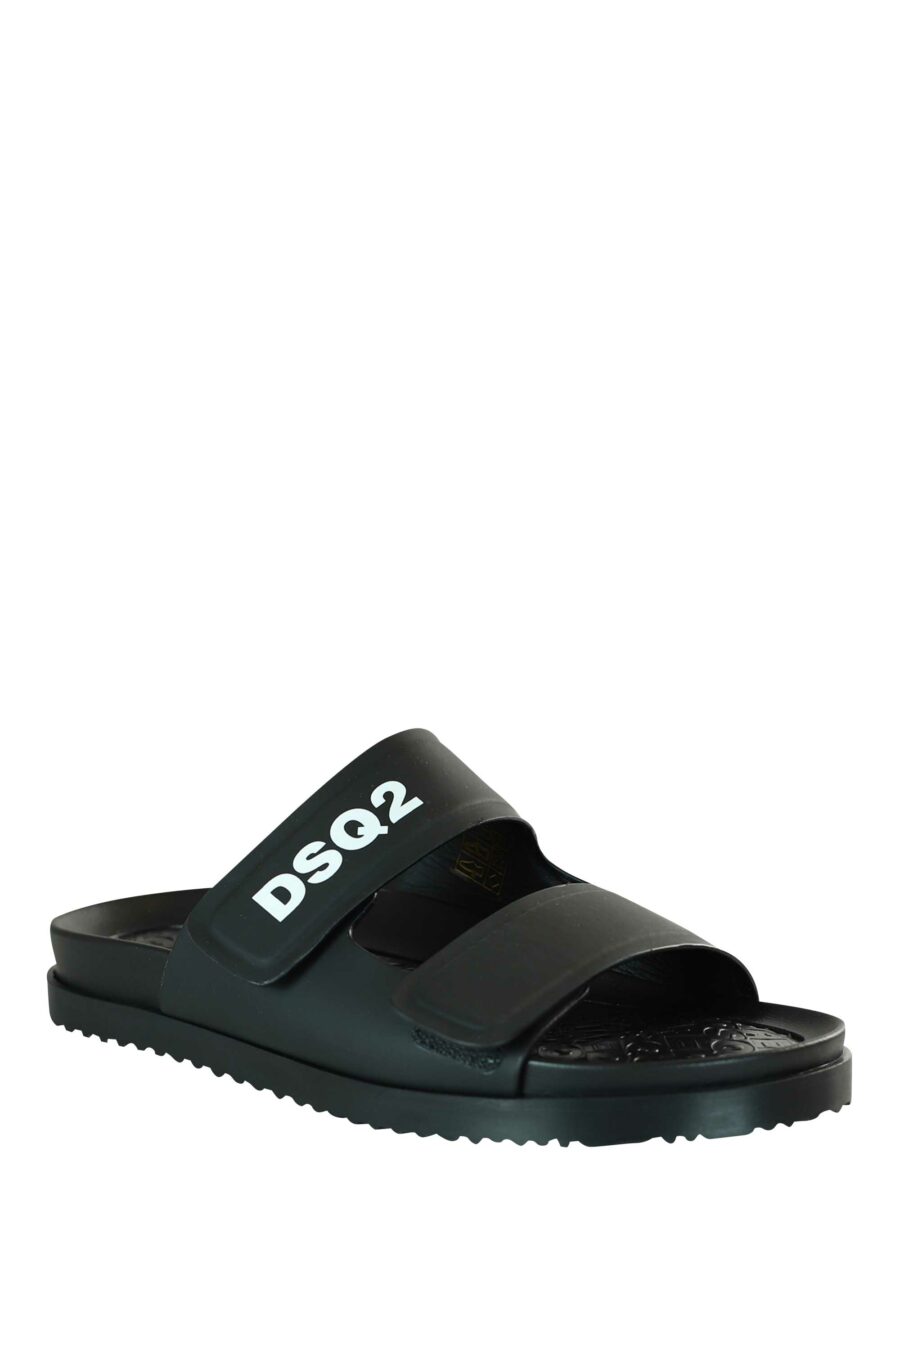 Black sandals with white "dsq2" logo and velcro - 8055777203200 2